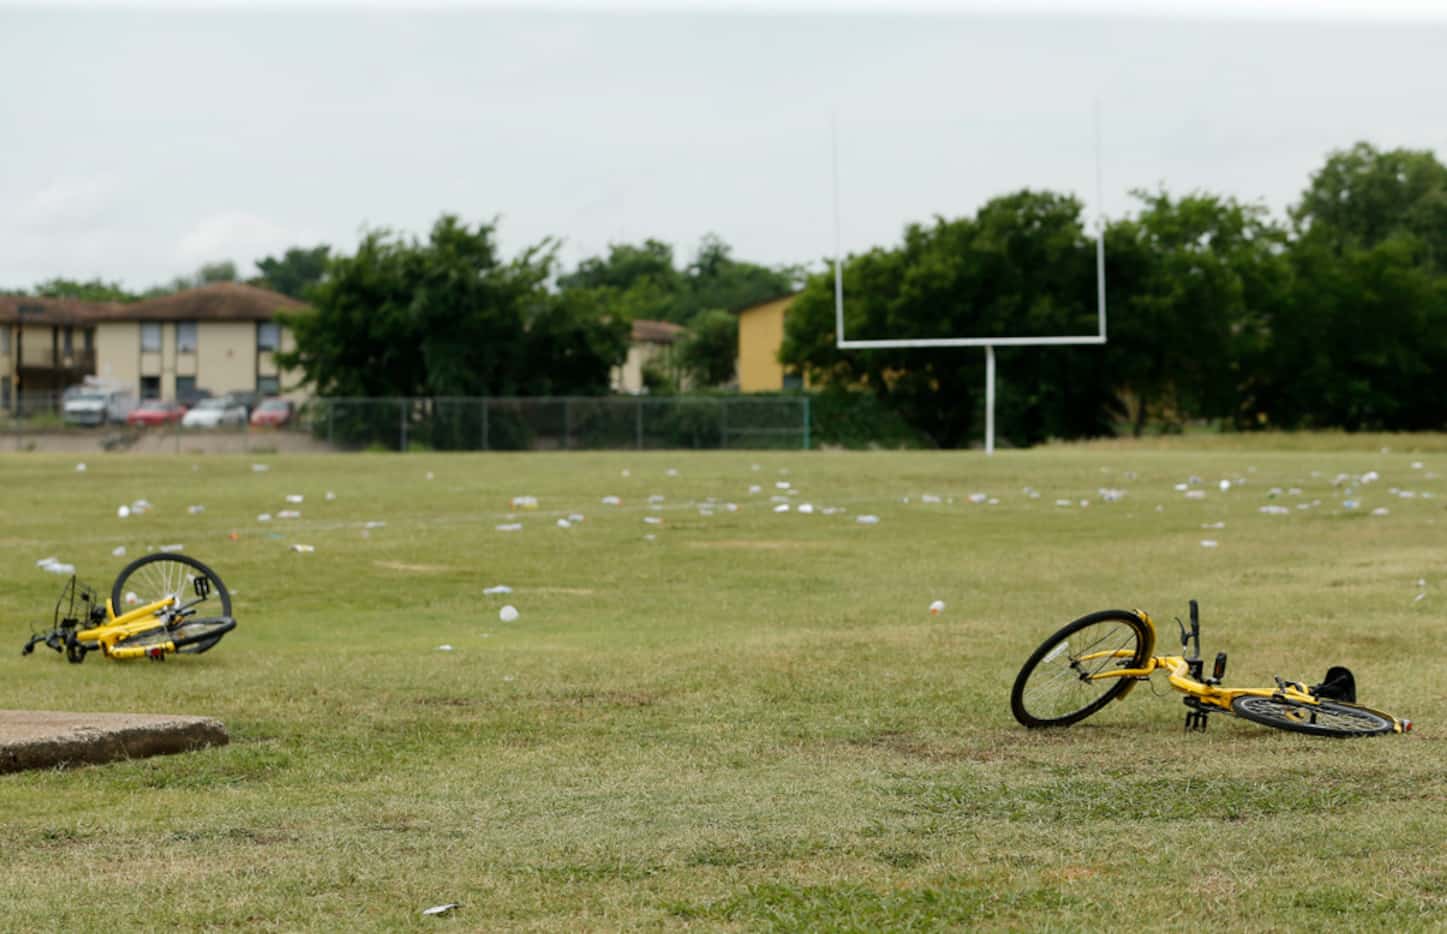 Bikes and debris on the football field at the Juanita Craft Recreation Center in Dallas.